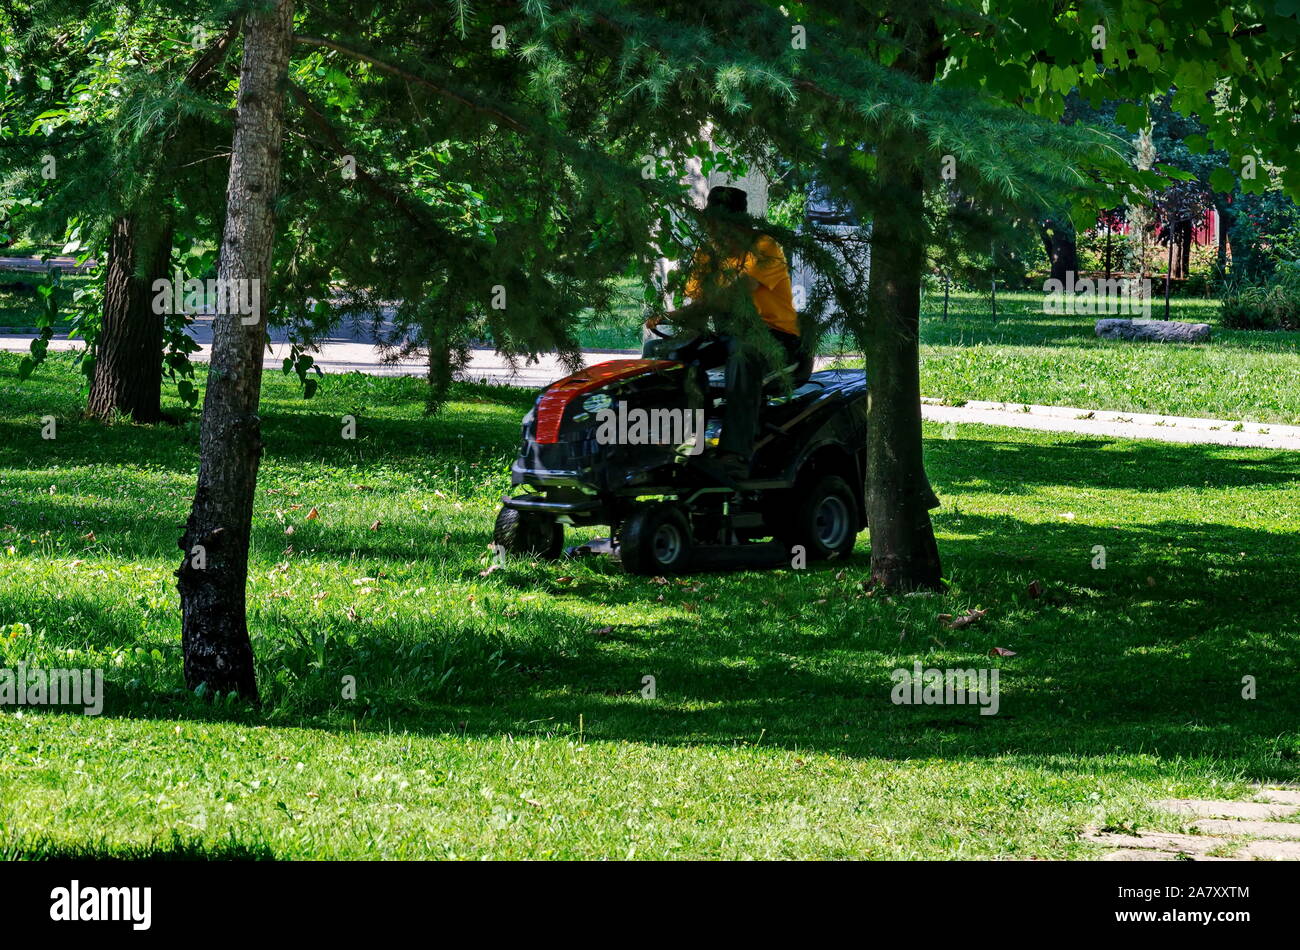 An experienced worker mows grass with a lawn tractor in the garden, Sofia, Bulgaria Stock Photo